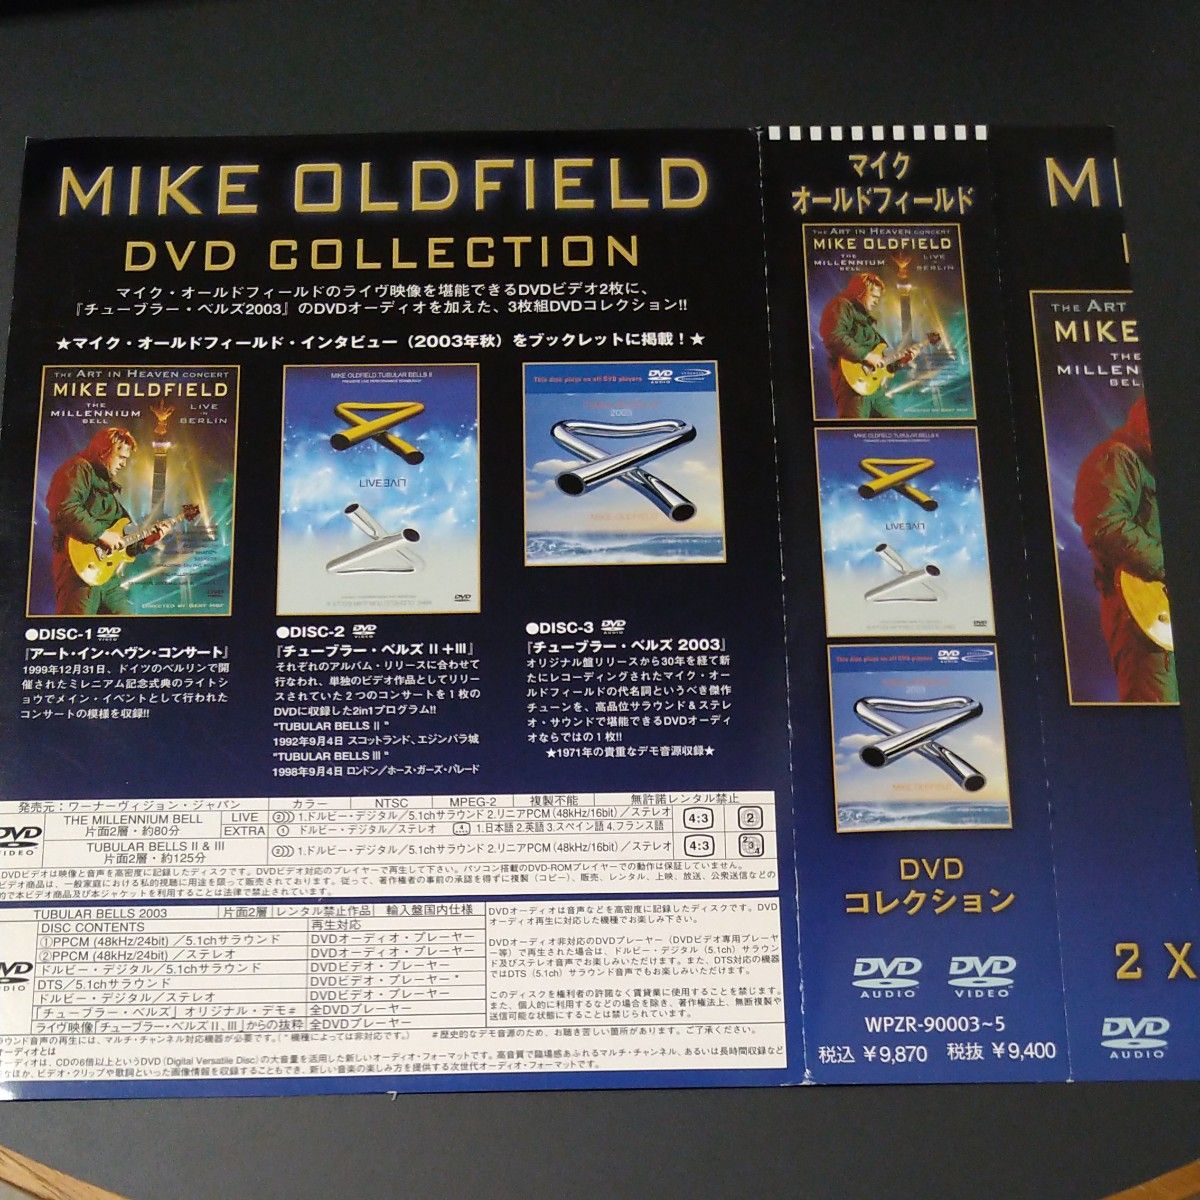 Mike Oldfield  DVD コレクション 国内盤DVD 3枚組 帯付き 解説付き 